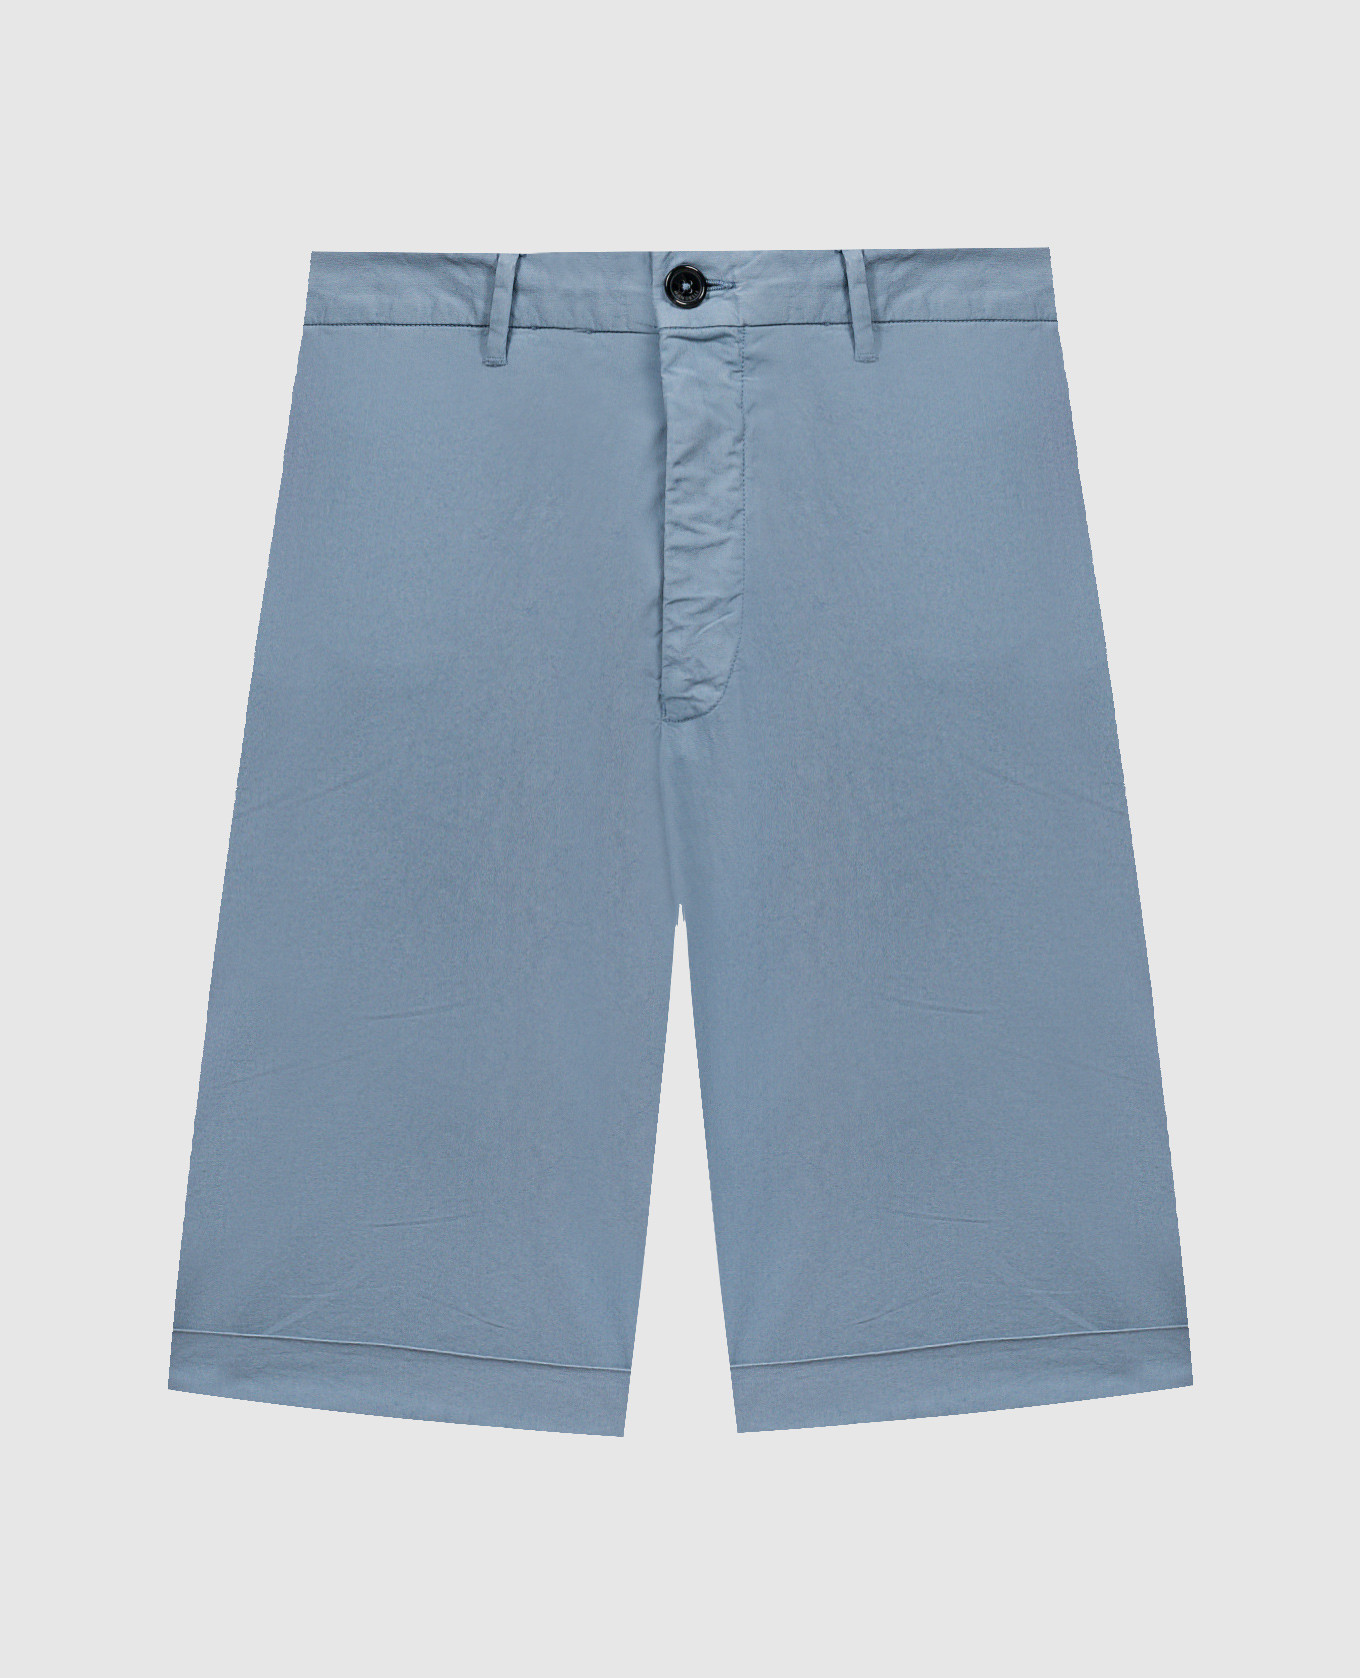 Blue shorts with lapels